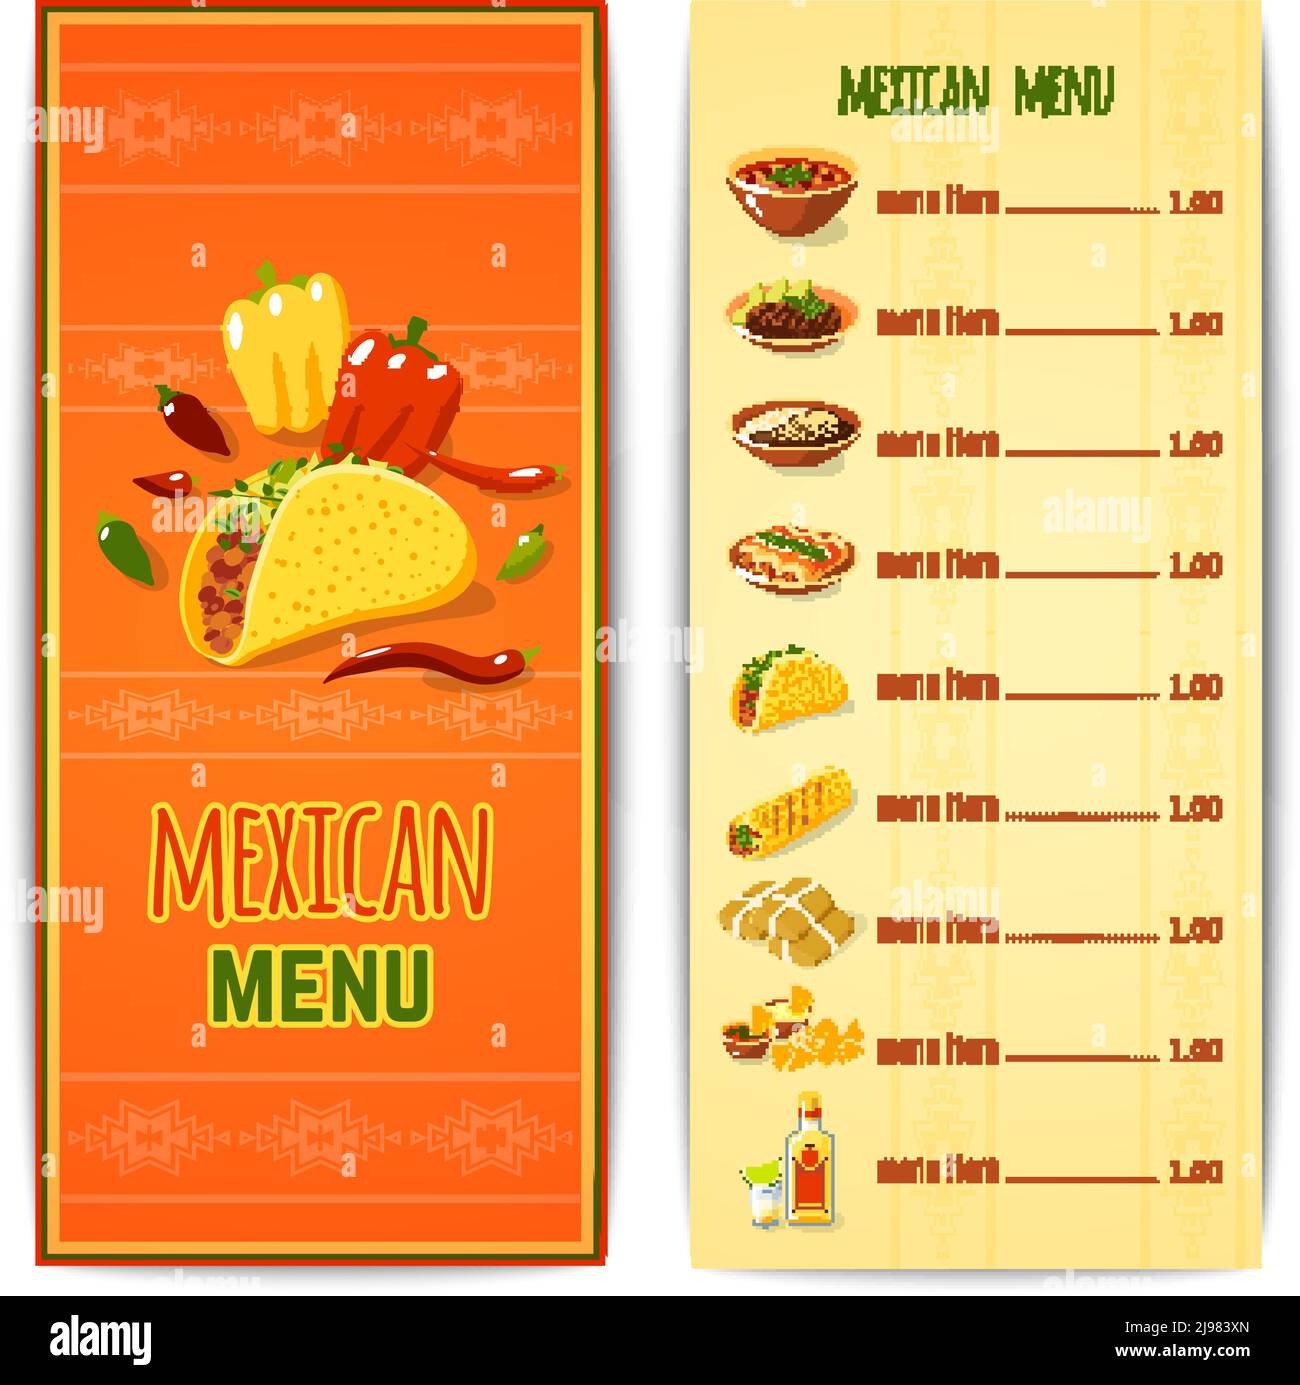 Mexican restaurant menu template with traditional spicy food cuisine ...